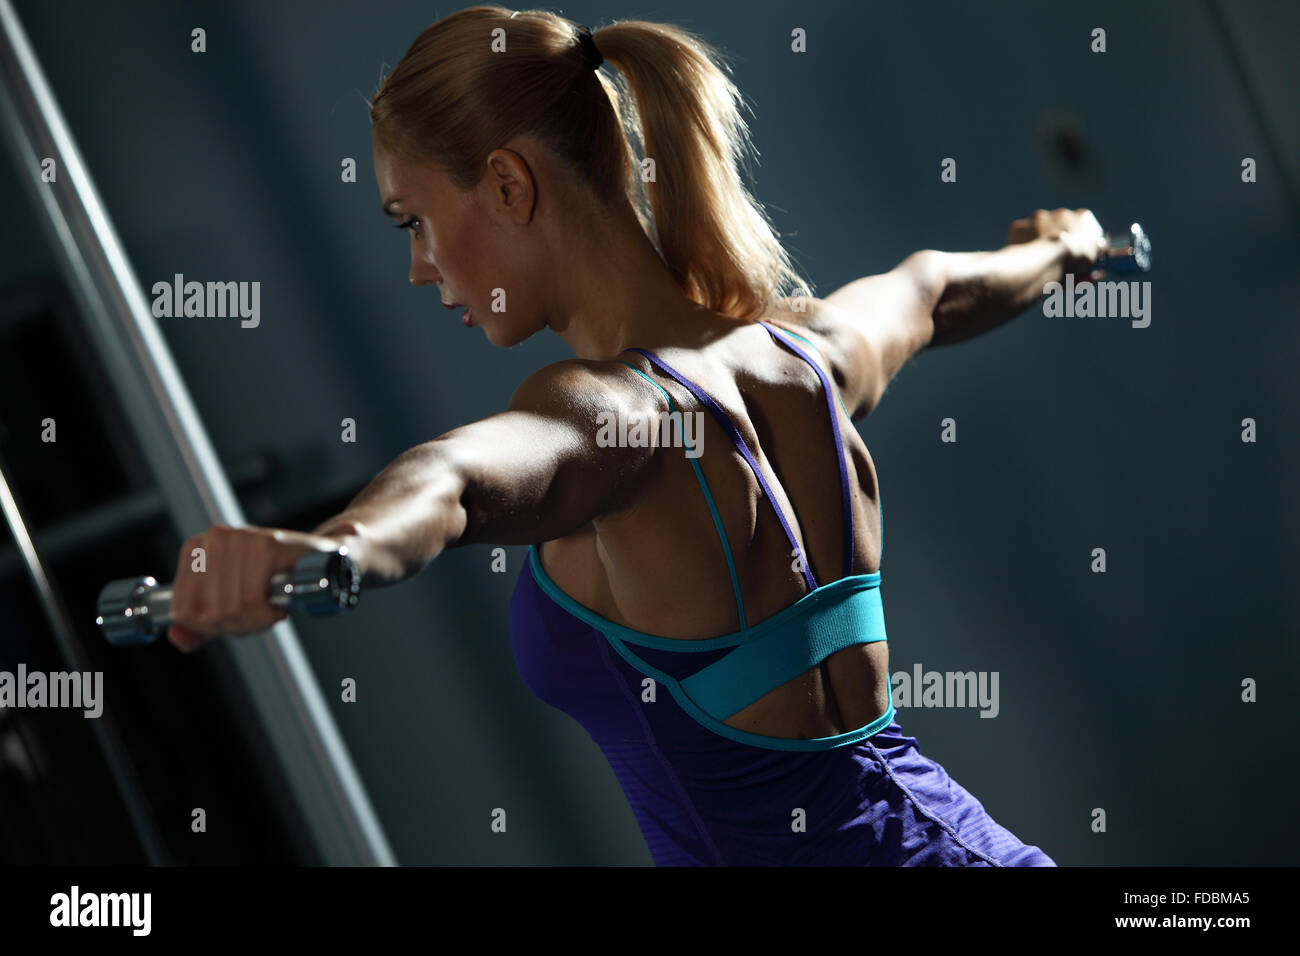 Image of fitness girl in gym exercising with dumbbells Stock Photo